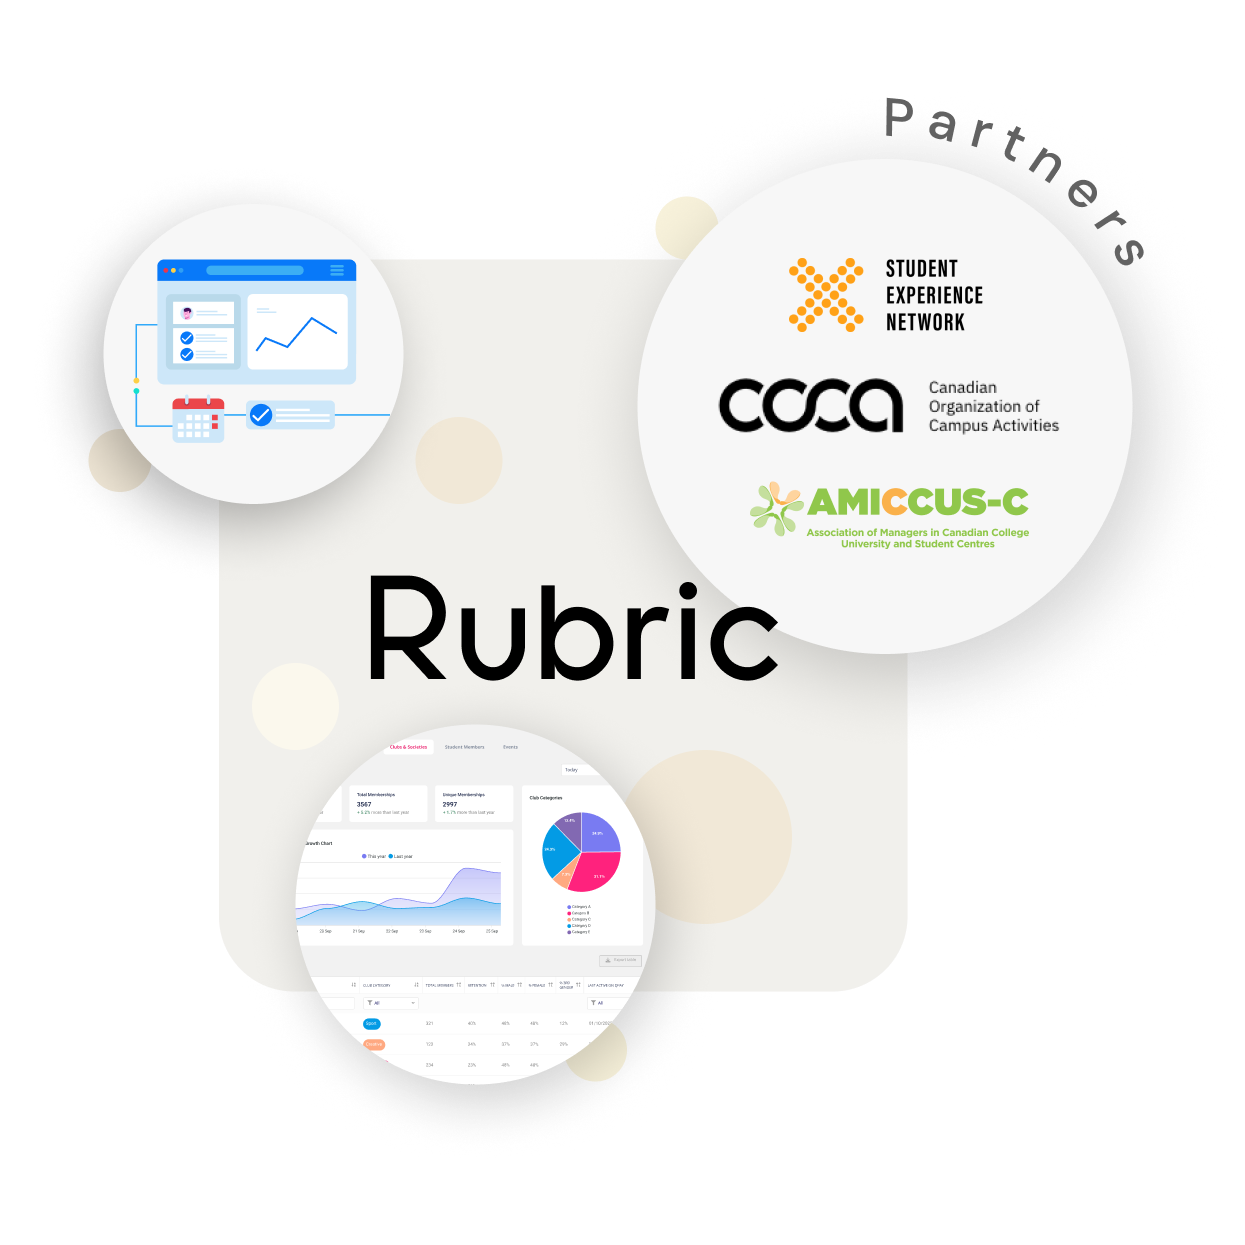 Rubric partners and values